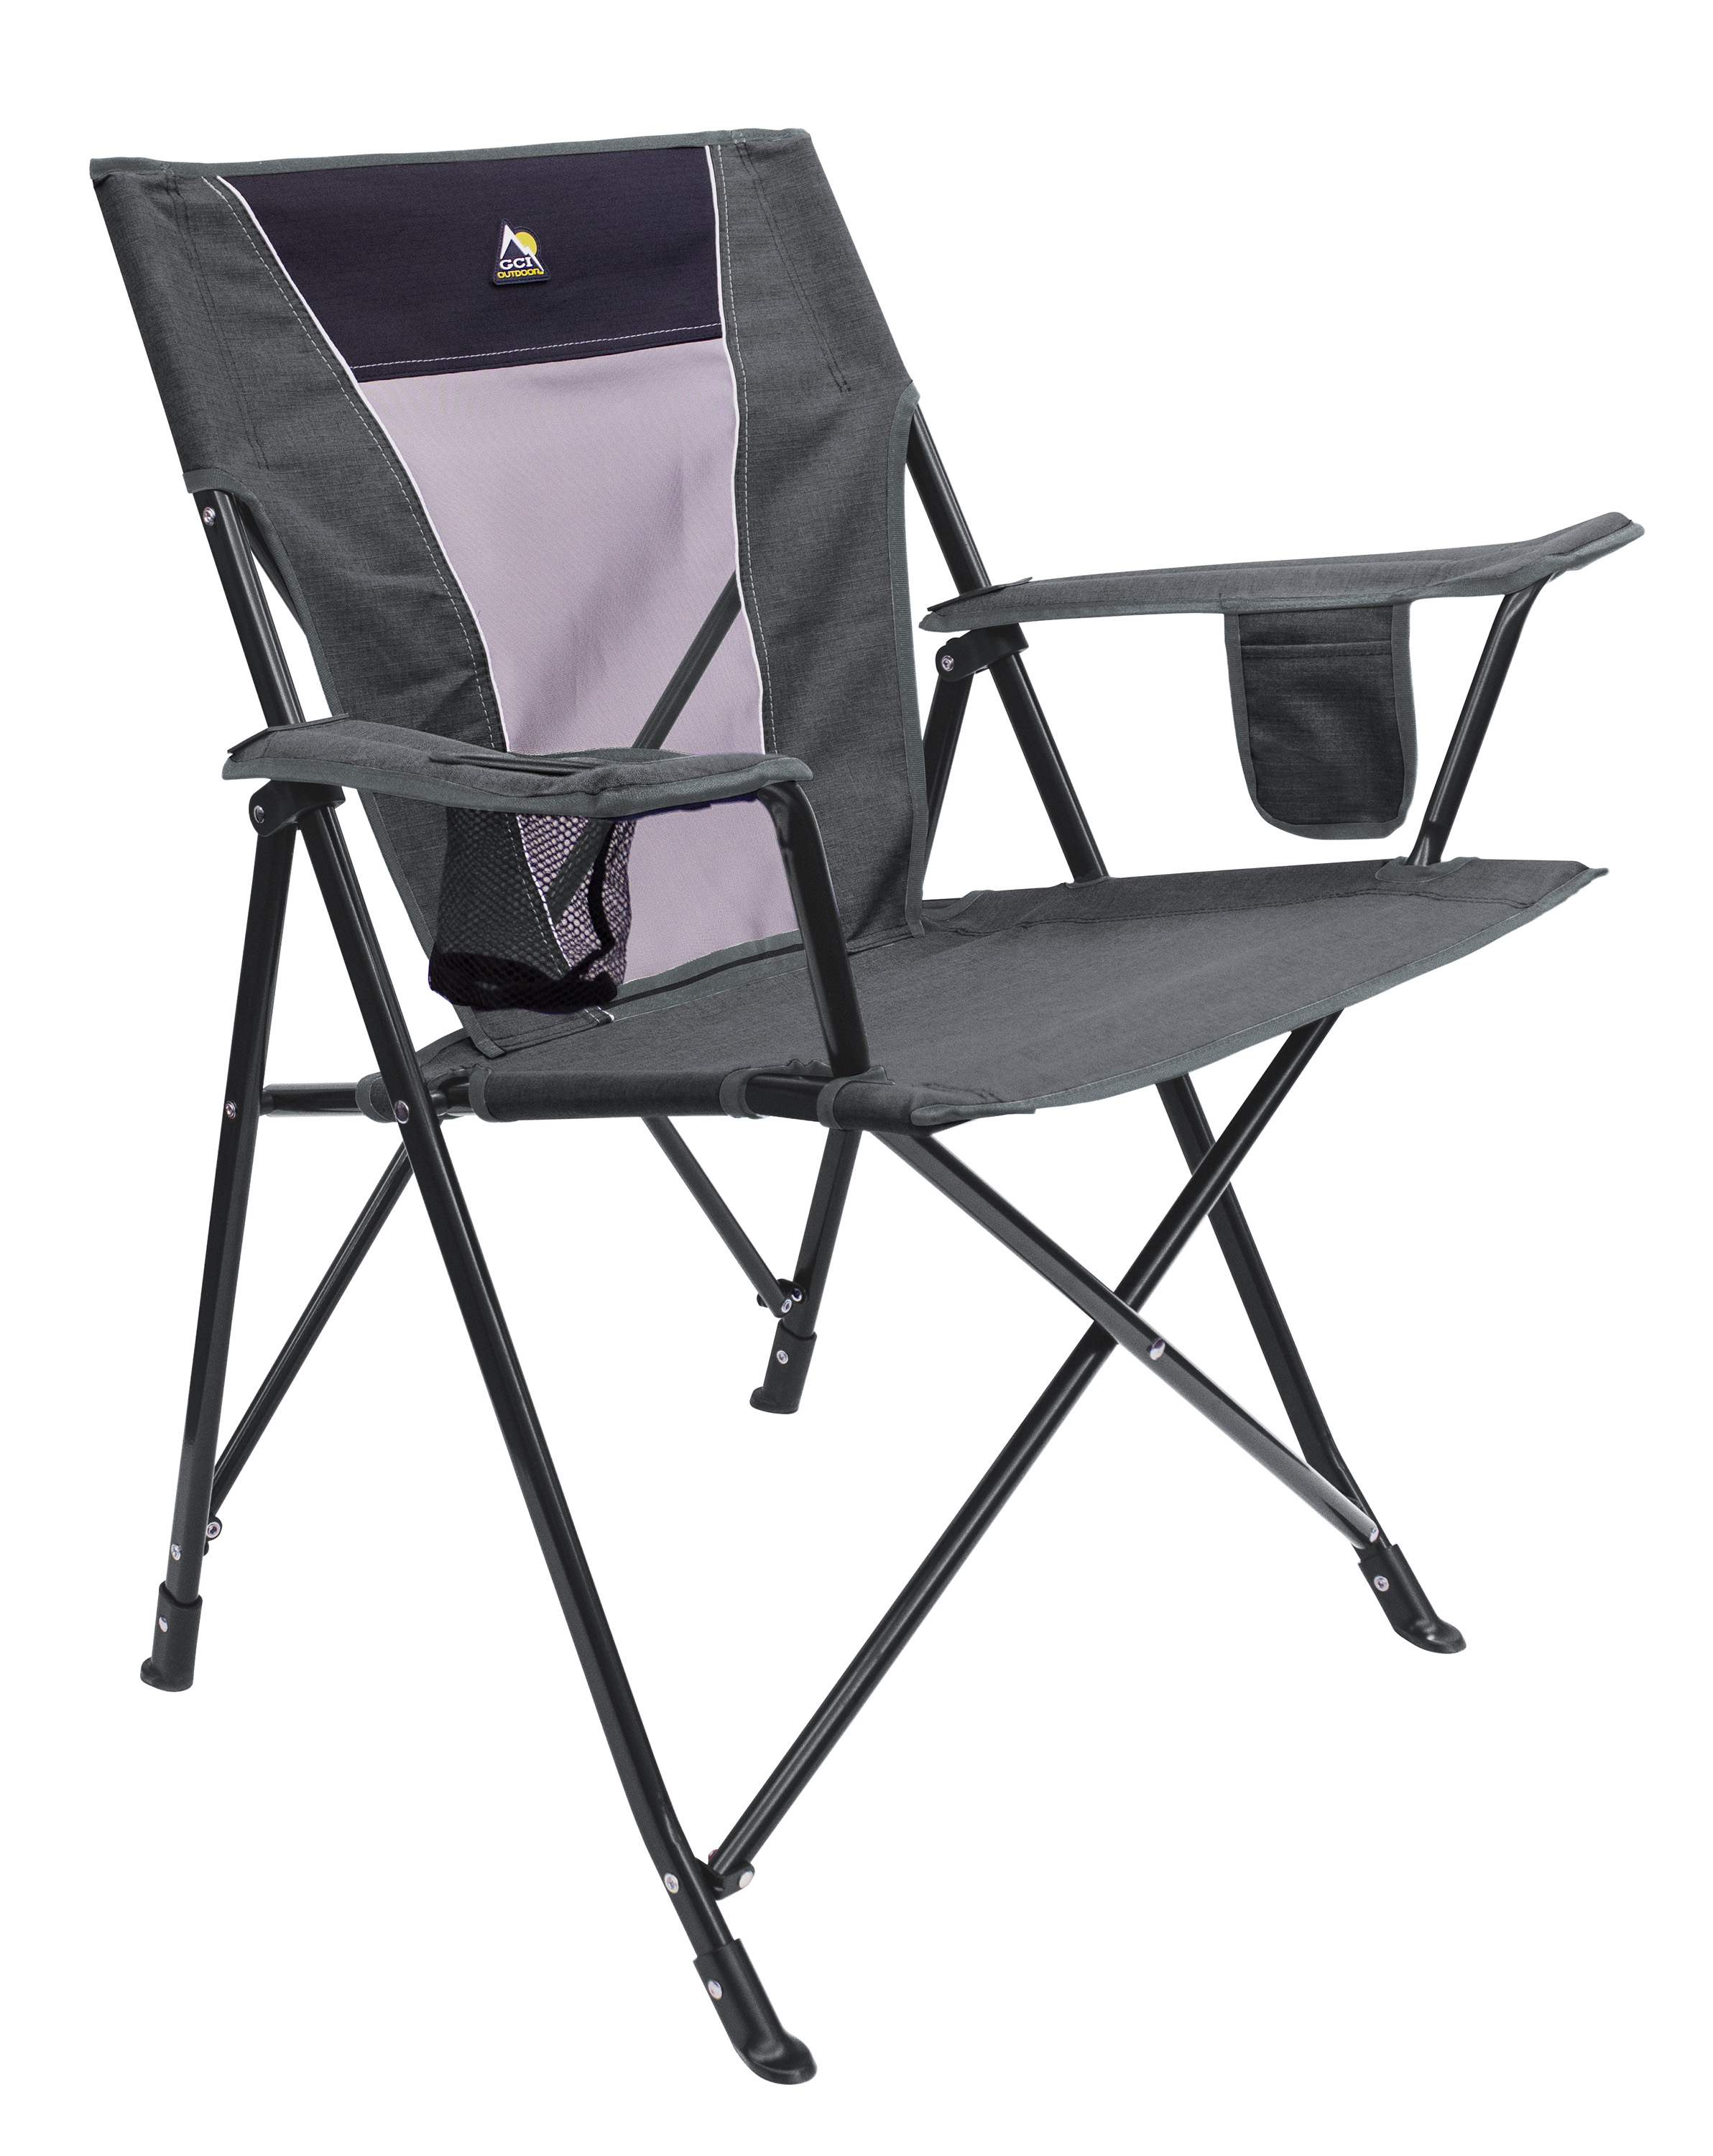 GCI Outdoor Comfort Pro Lightweight Folding Camping Chair, Heathered Pewter - image 1 of 4